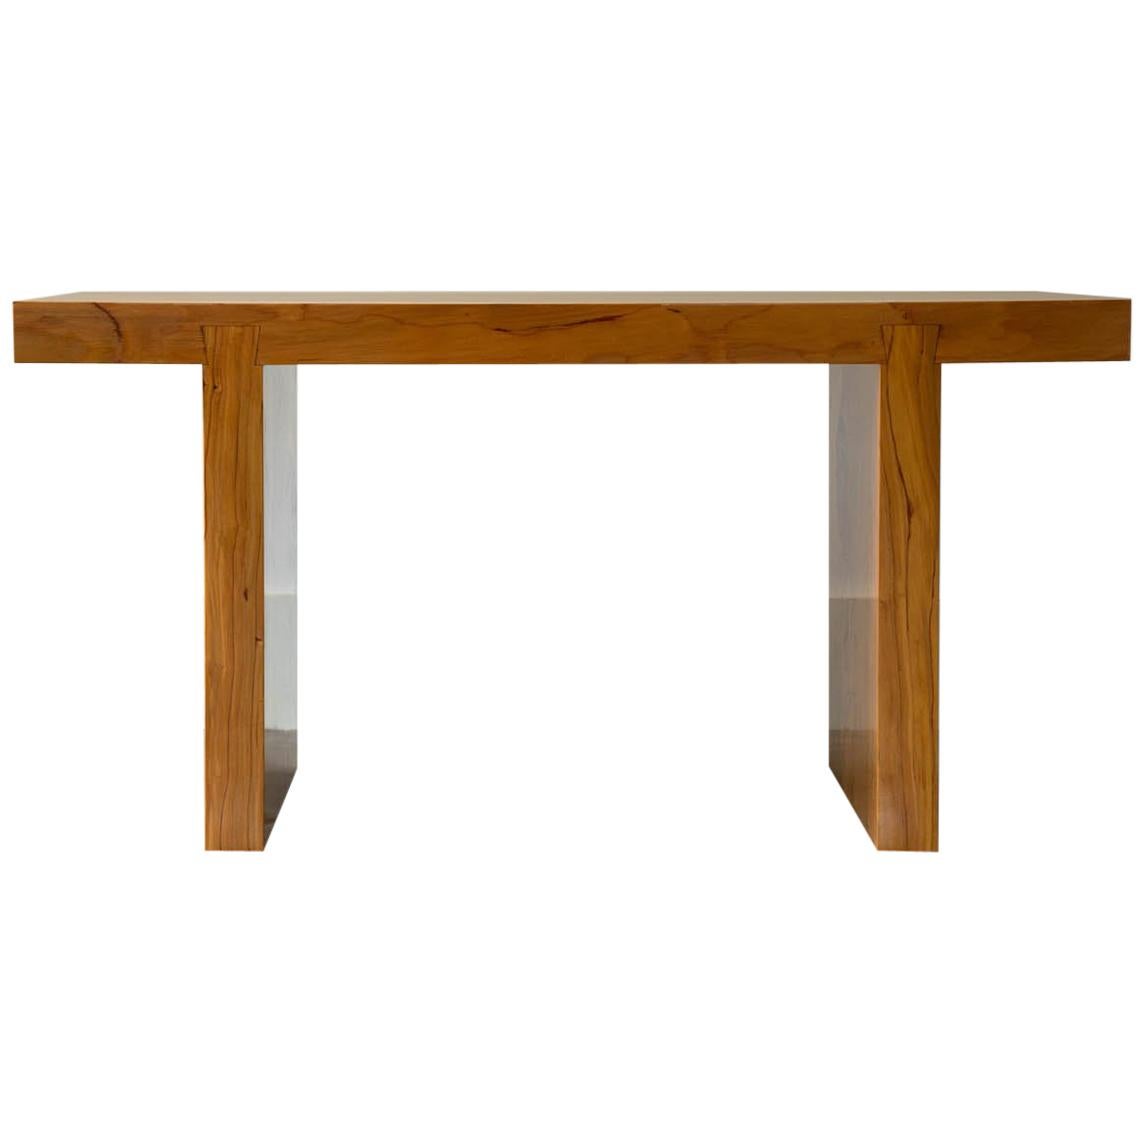 Asian Inspired Solid Wood Bench in Hemlock for Entry Bench or End of Bench Bench